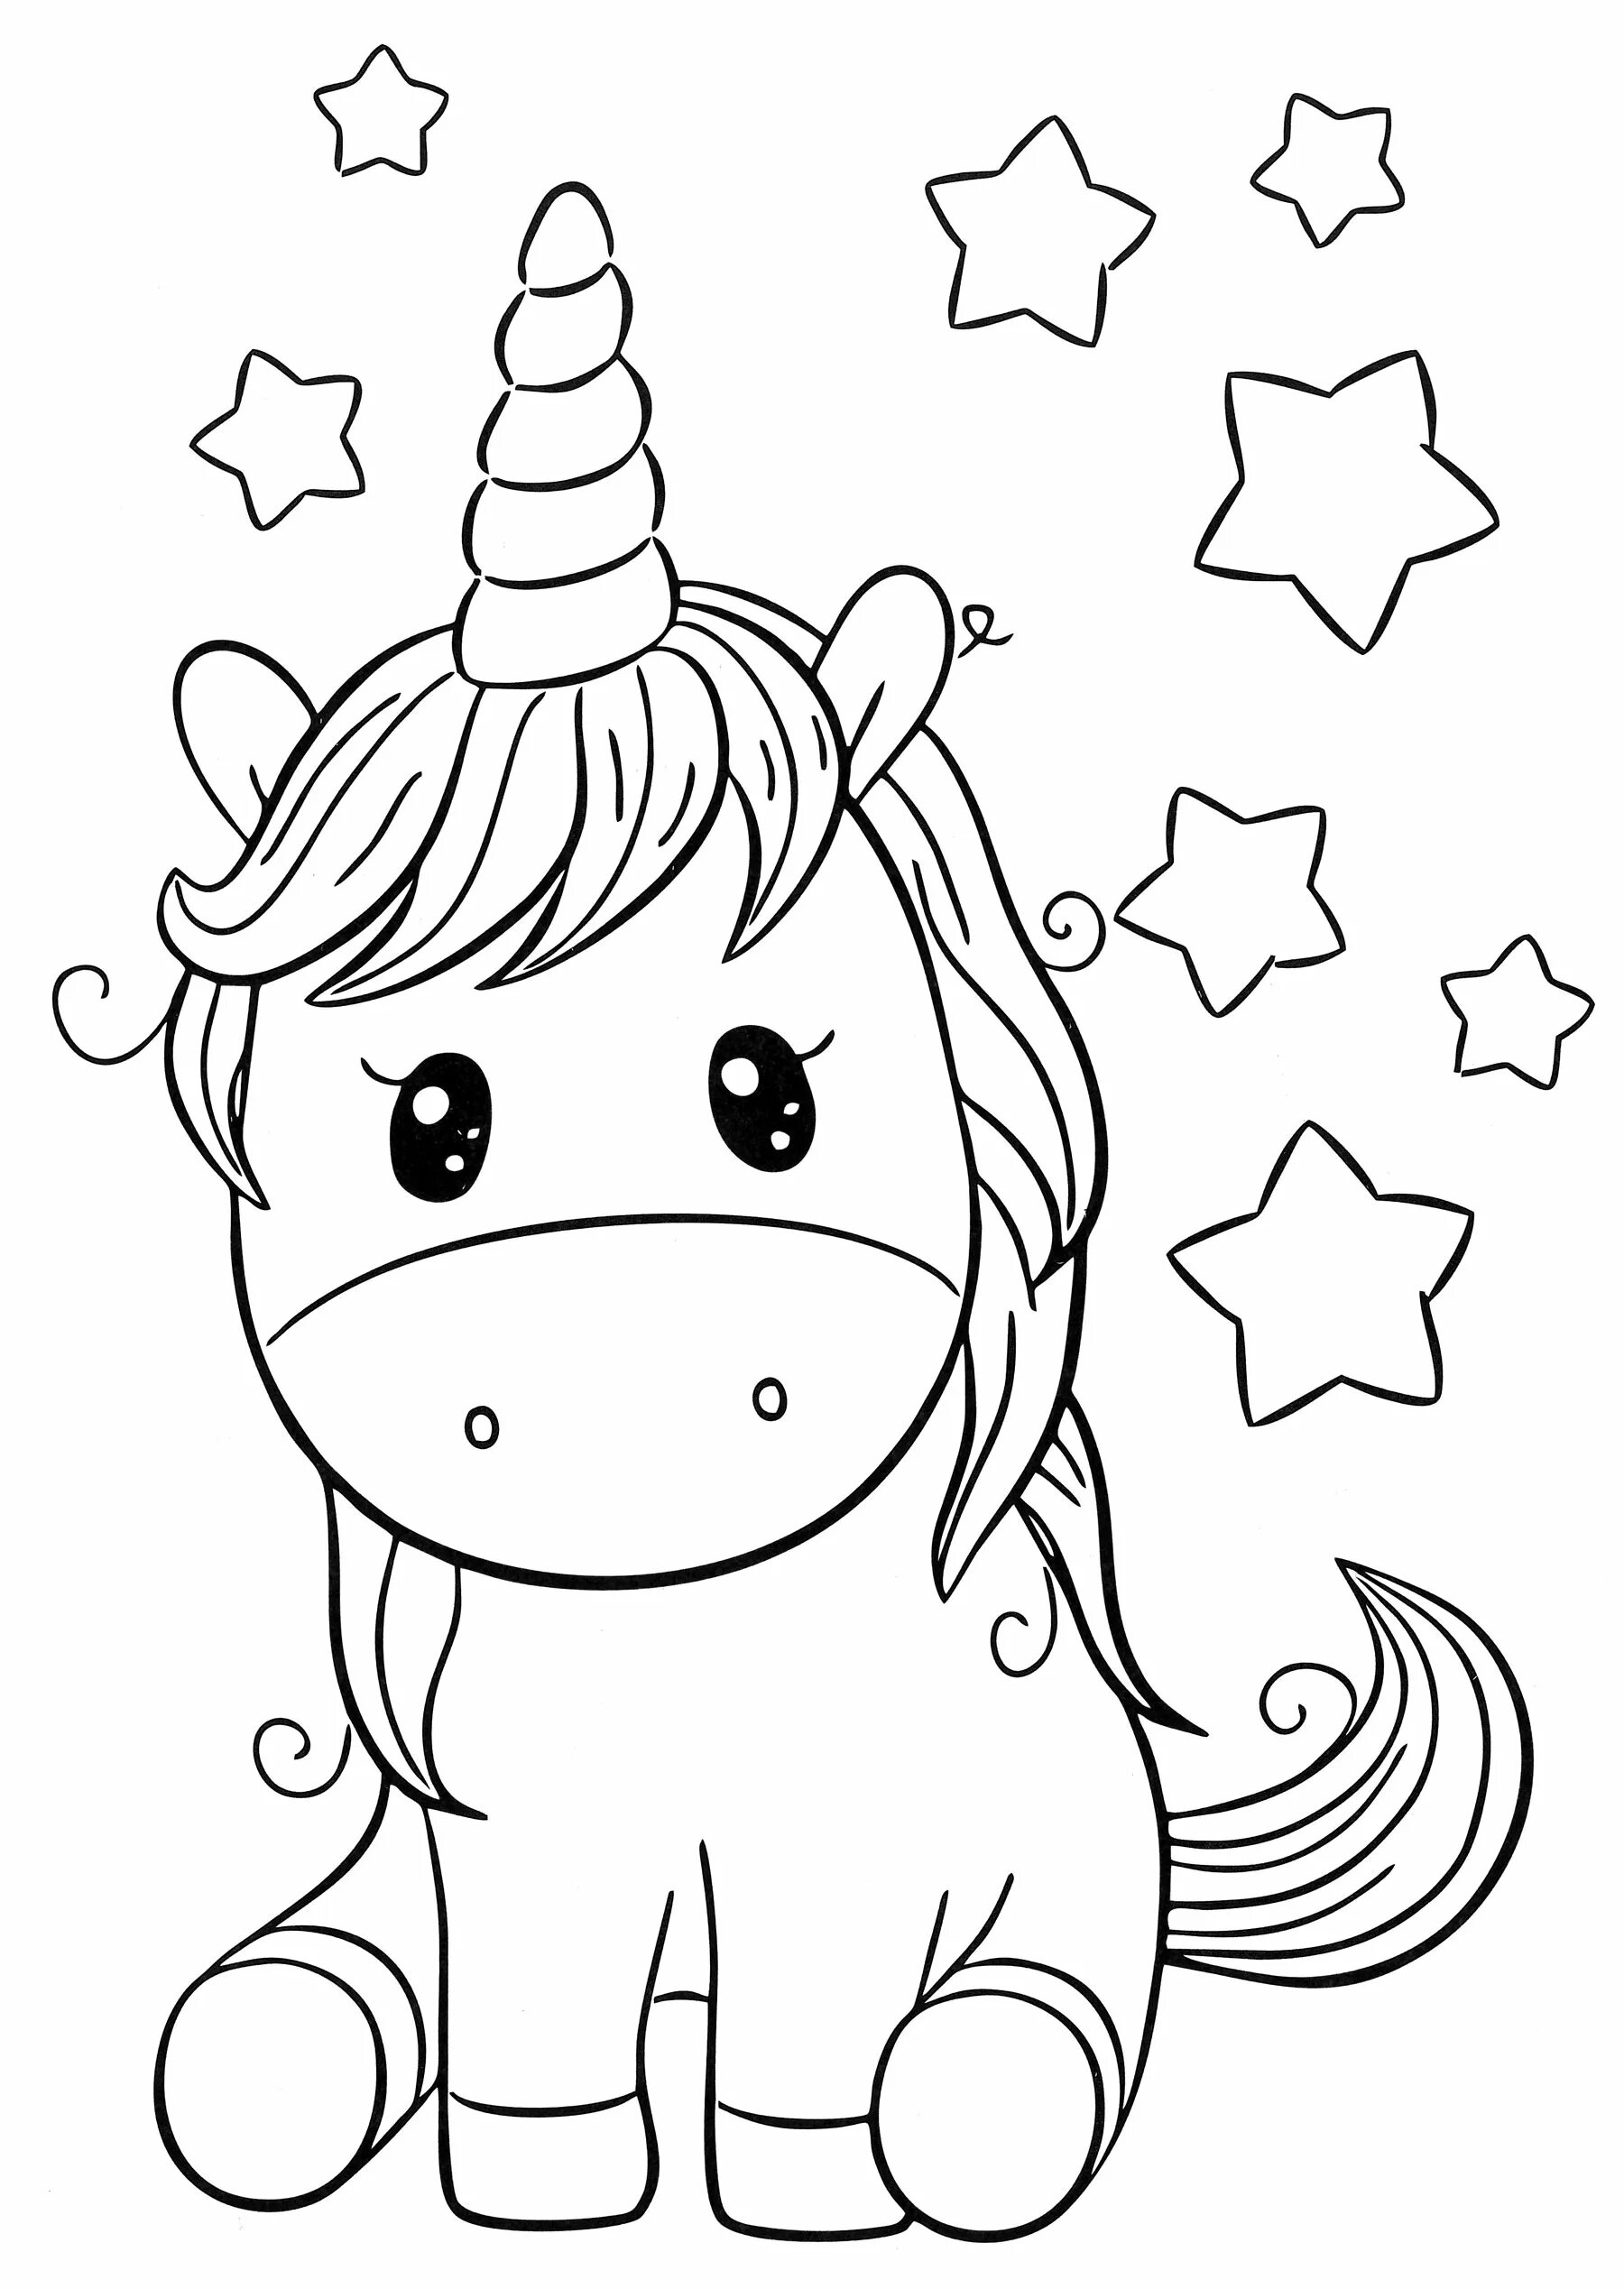 Coloring book for girls cute unicorn